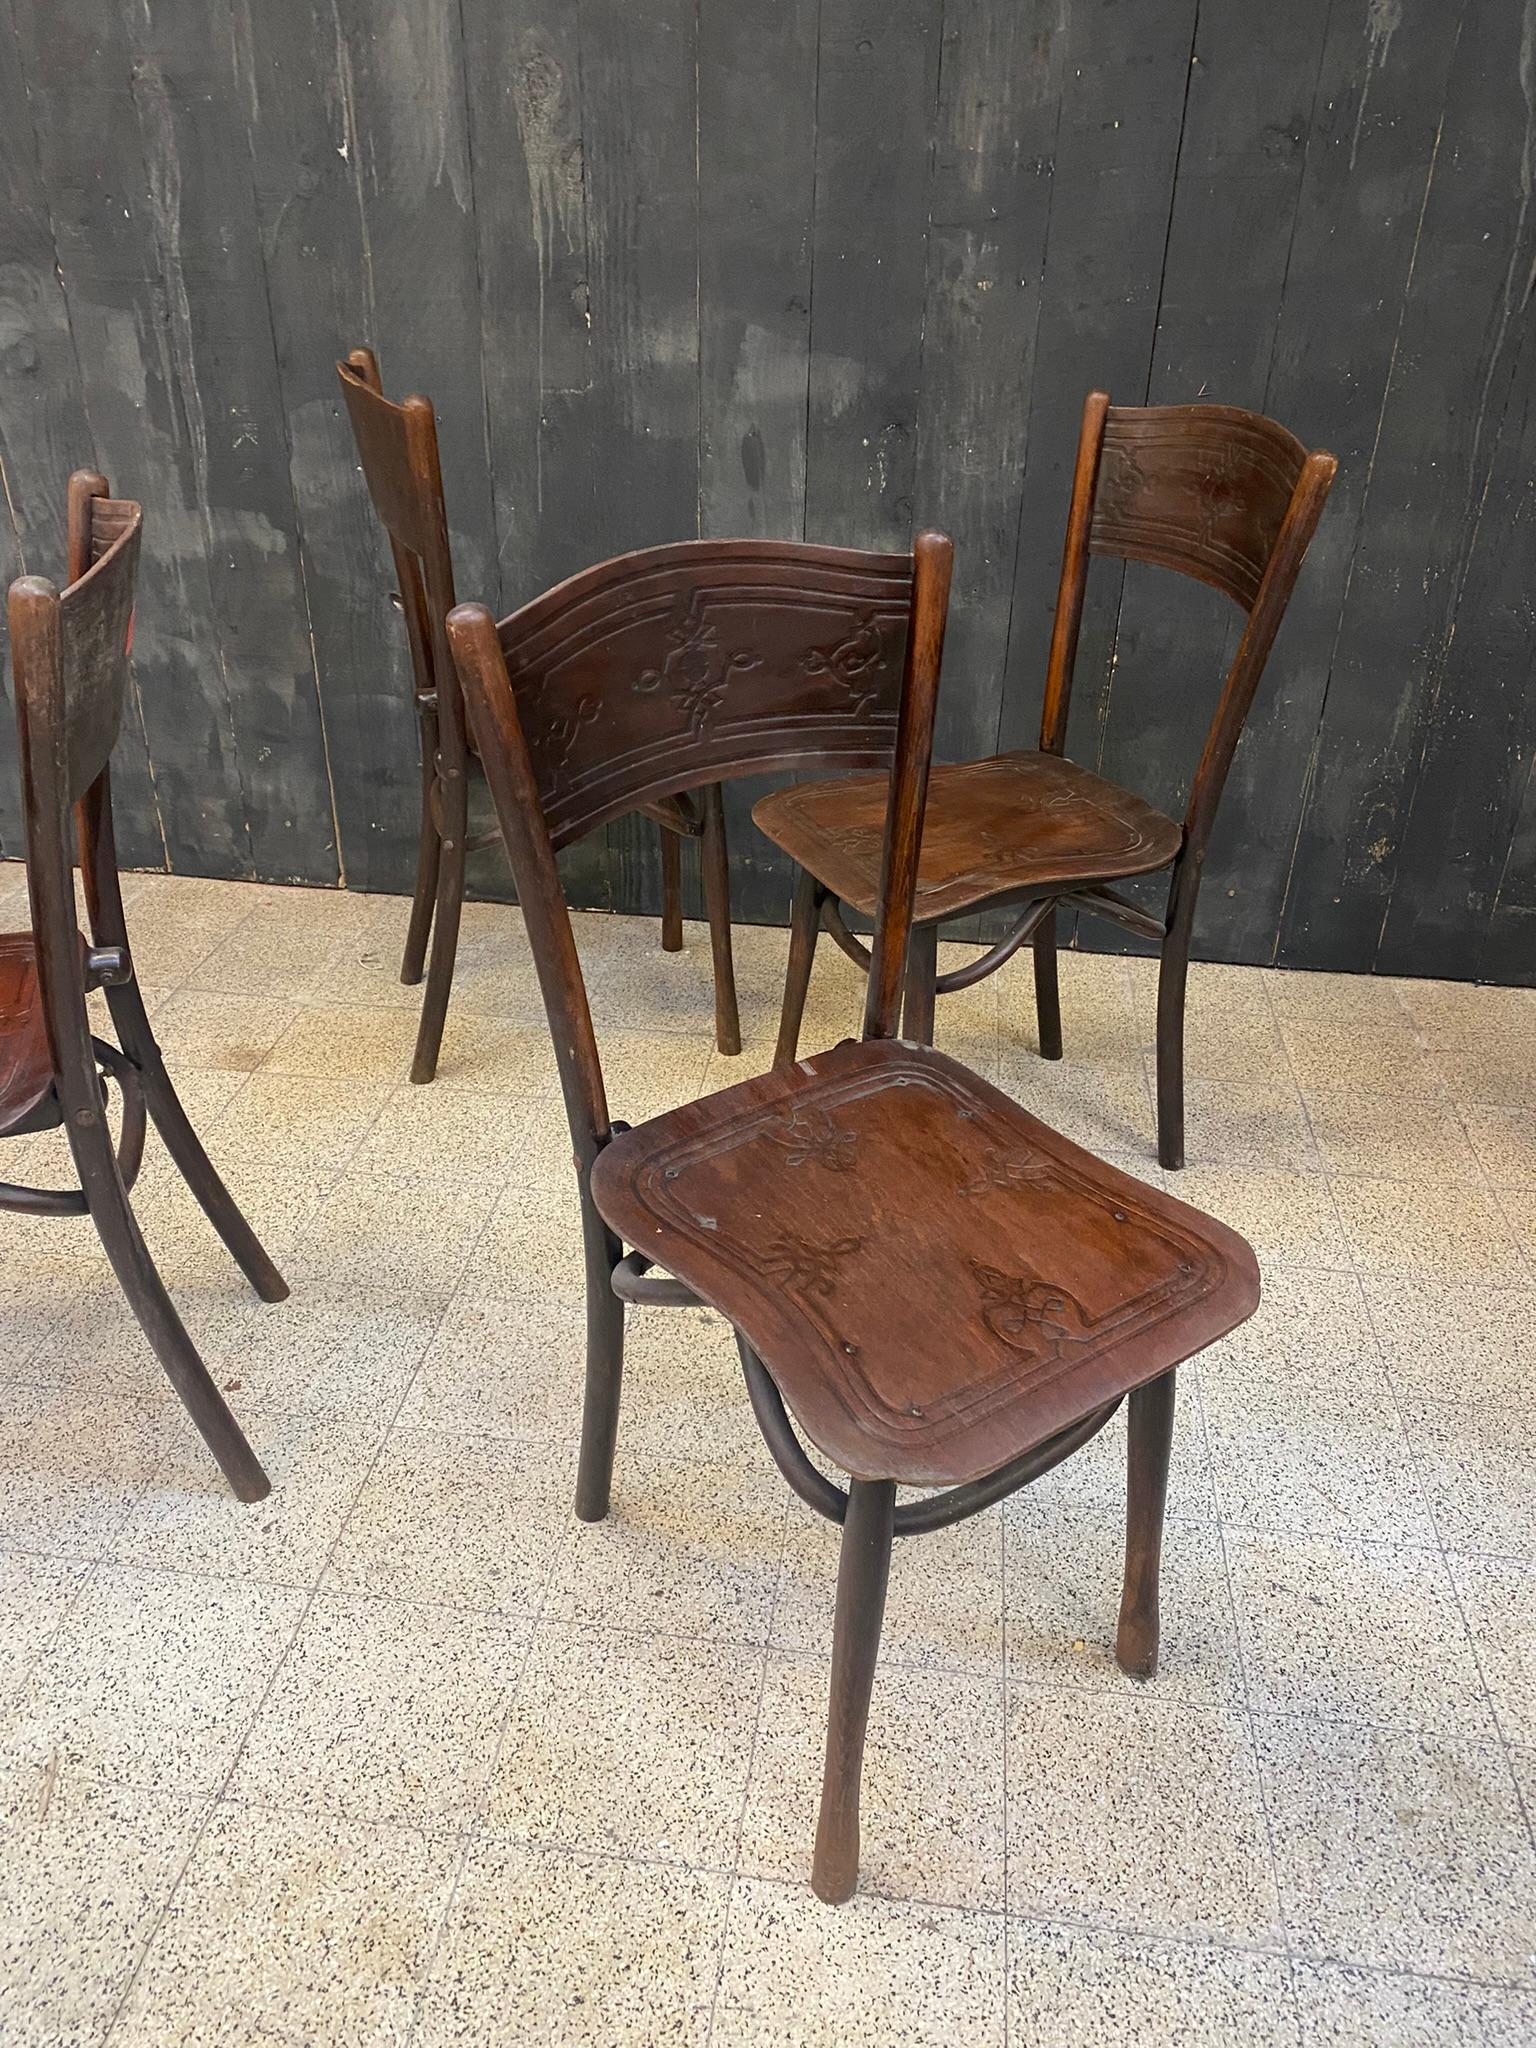 4 Antique chairs from Jacob & Josef Kohn,
circa 1900.
Some flaws.